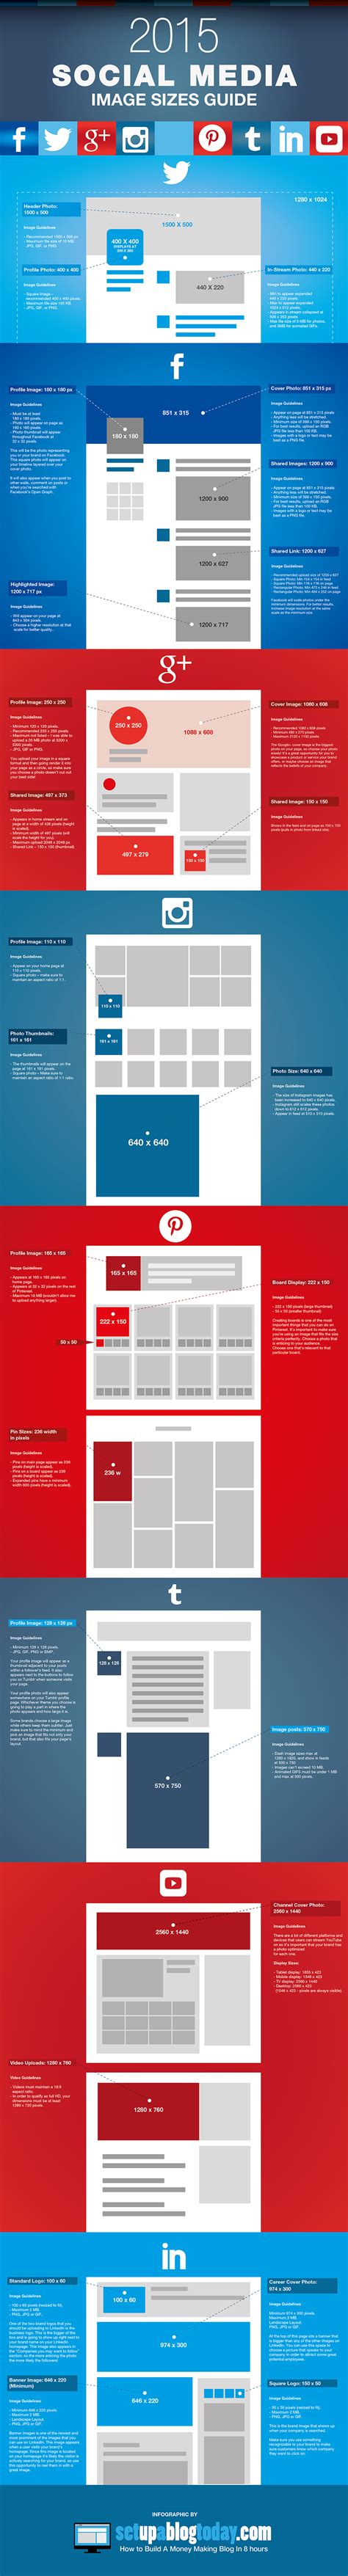 social media image sizes guide  infographic